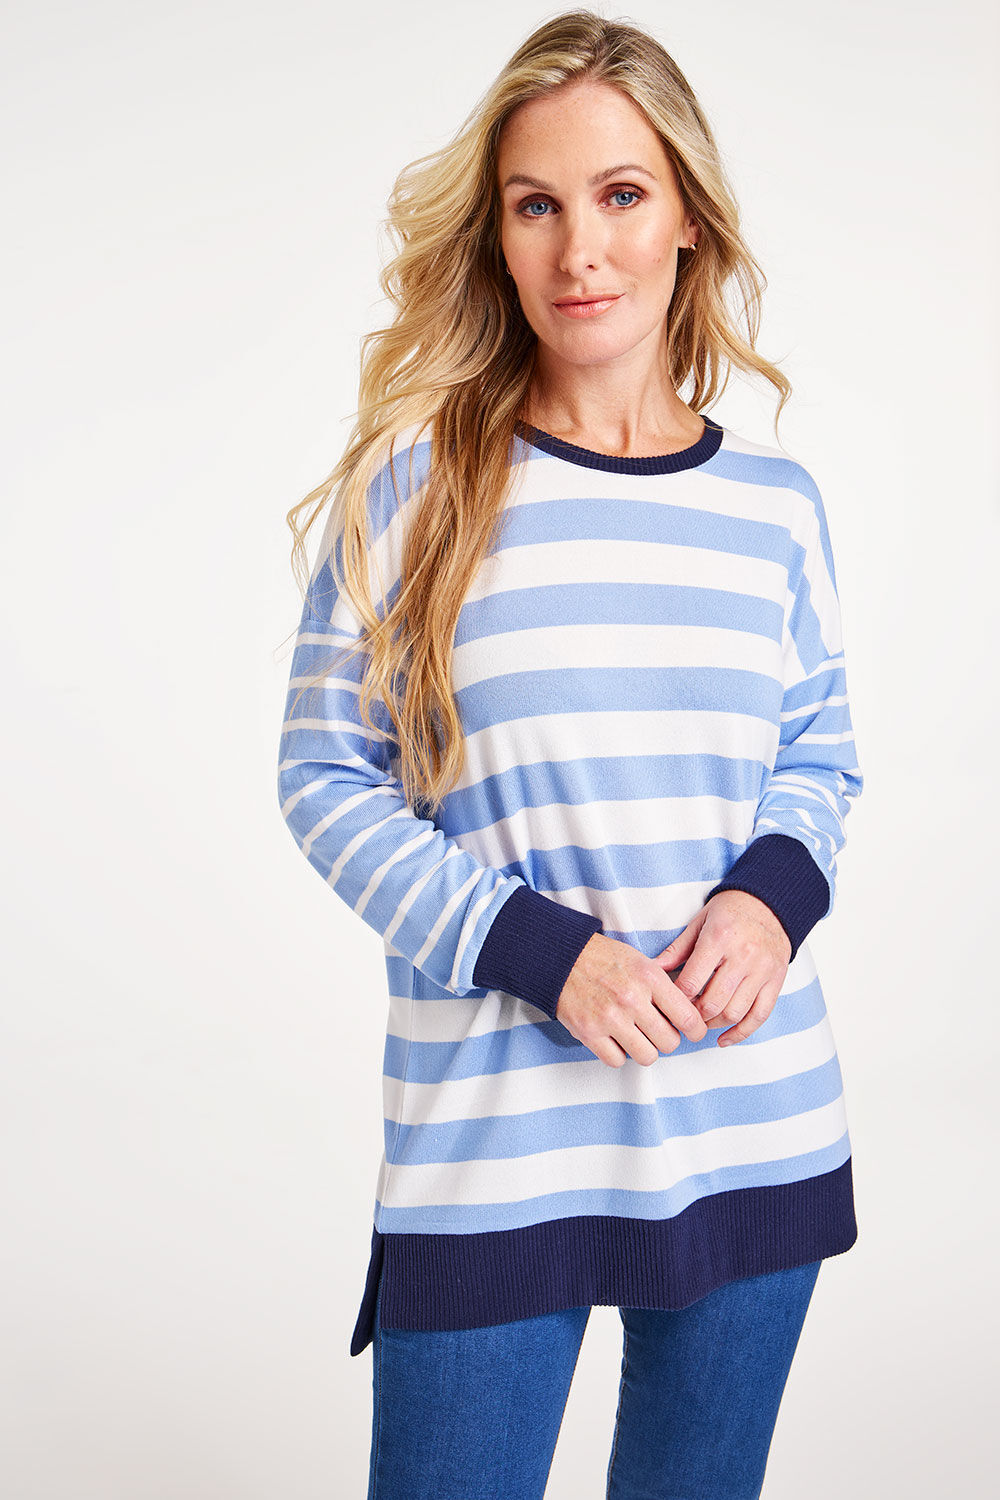 Bonmarche Blue Long Sleeve Striped Soft Touch Tunic, Size: 10